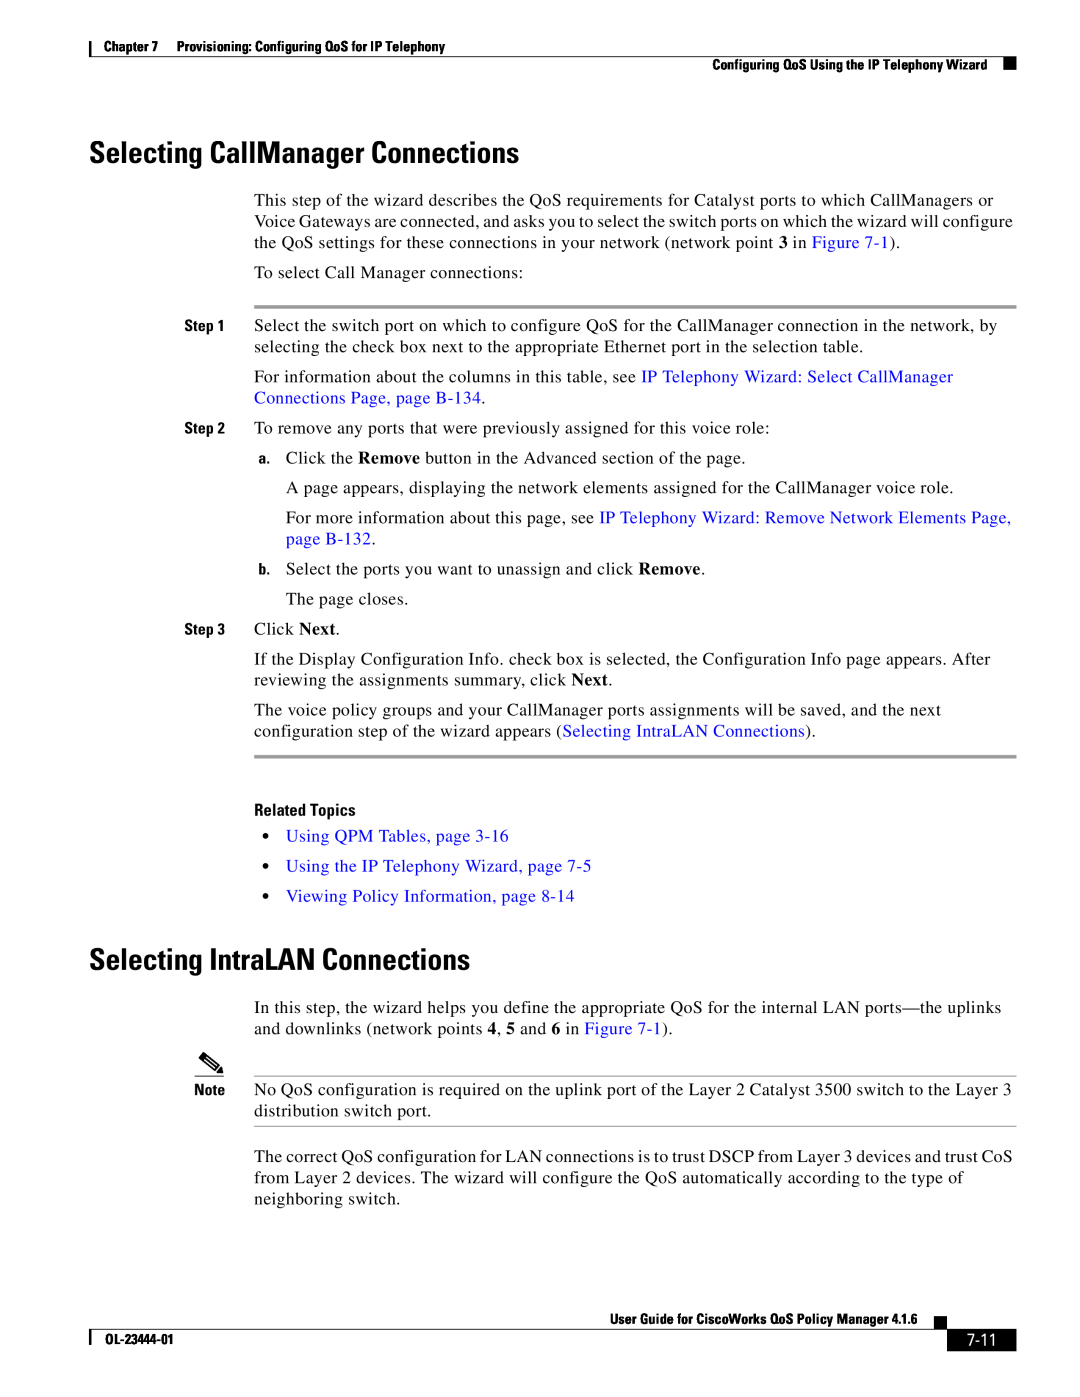 Cisco Systems 416 manual Selecting CallManager Connections, Selecting IntraLAN Connections, 7-11, Related Topics 